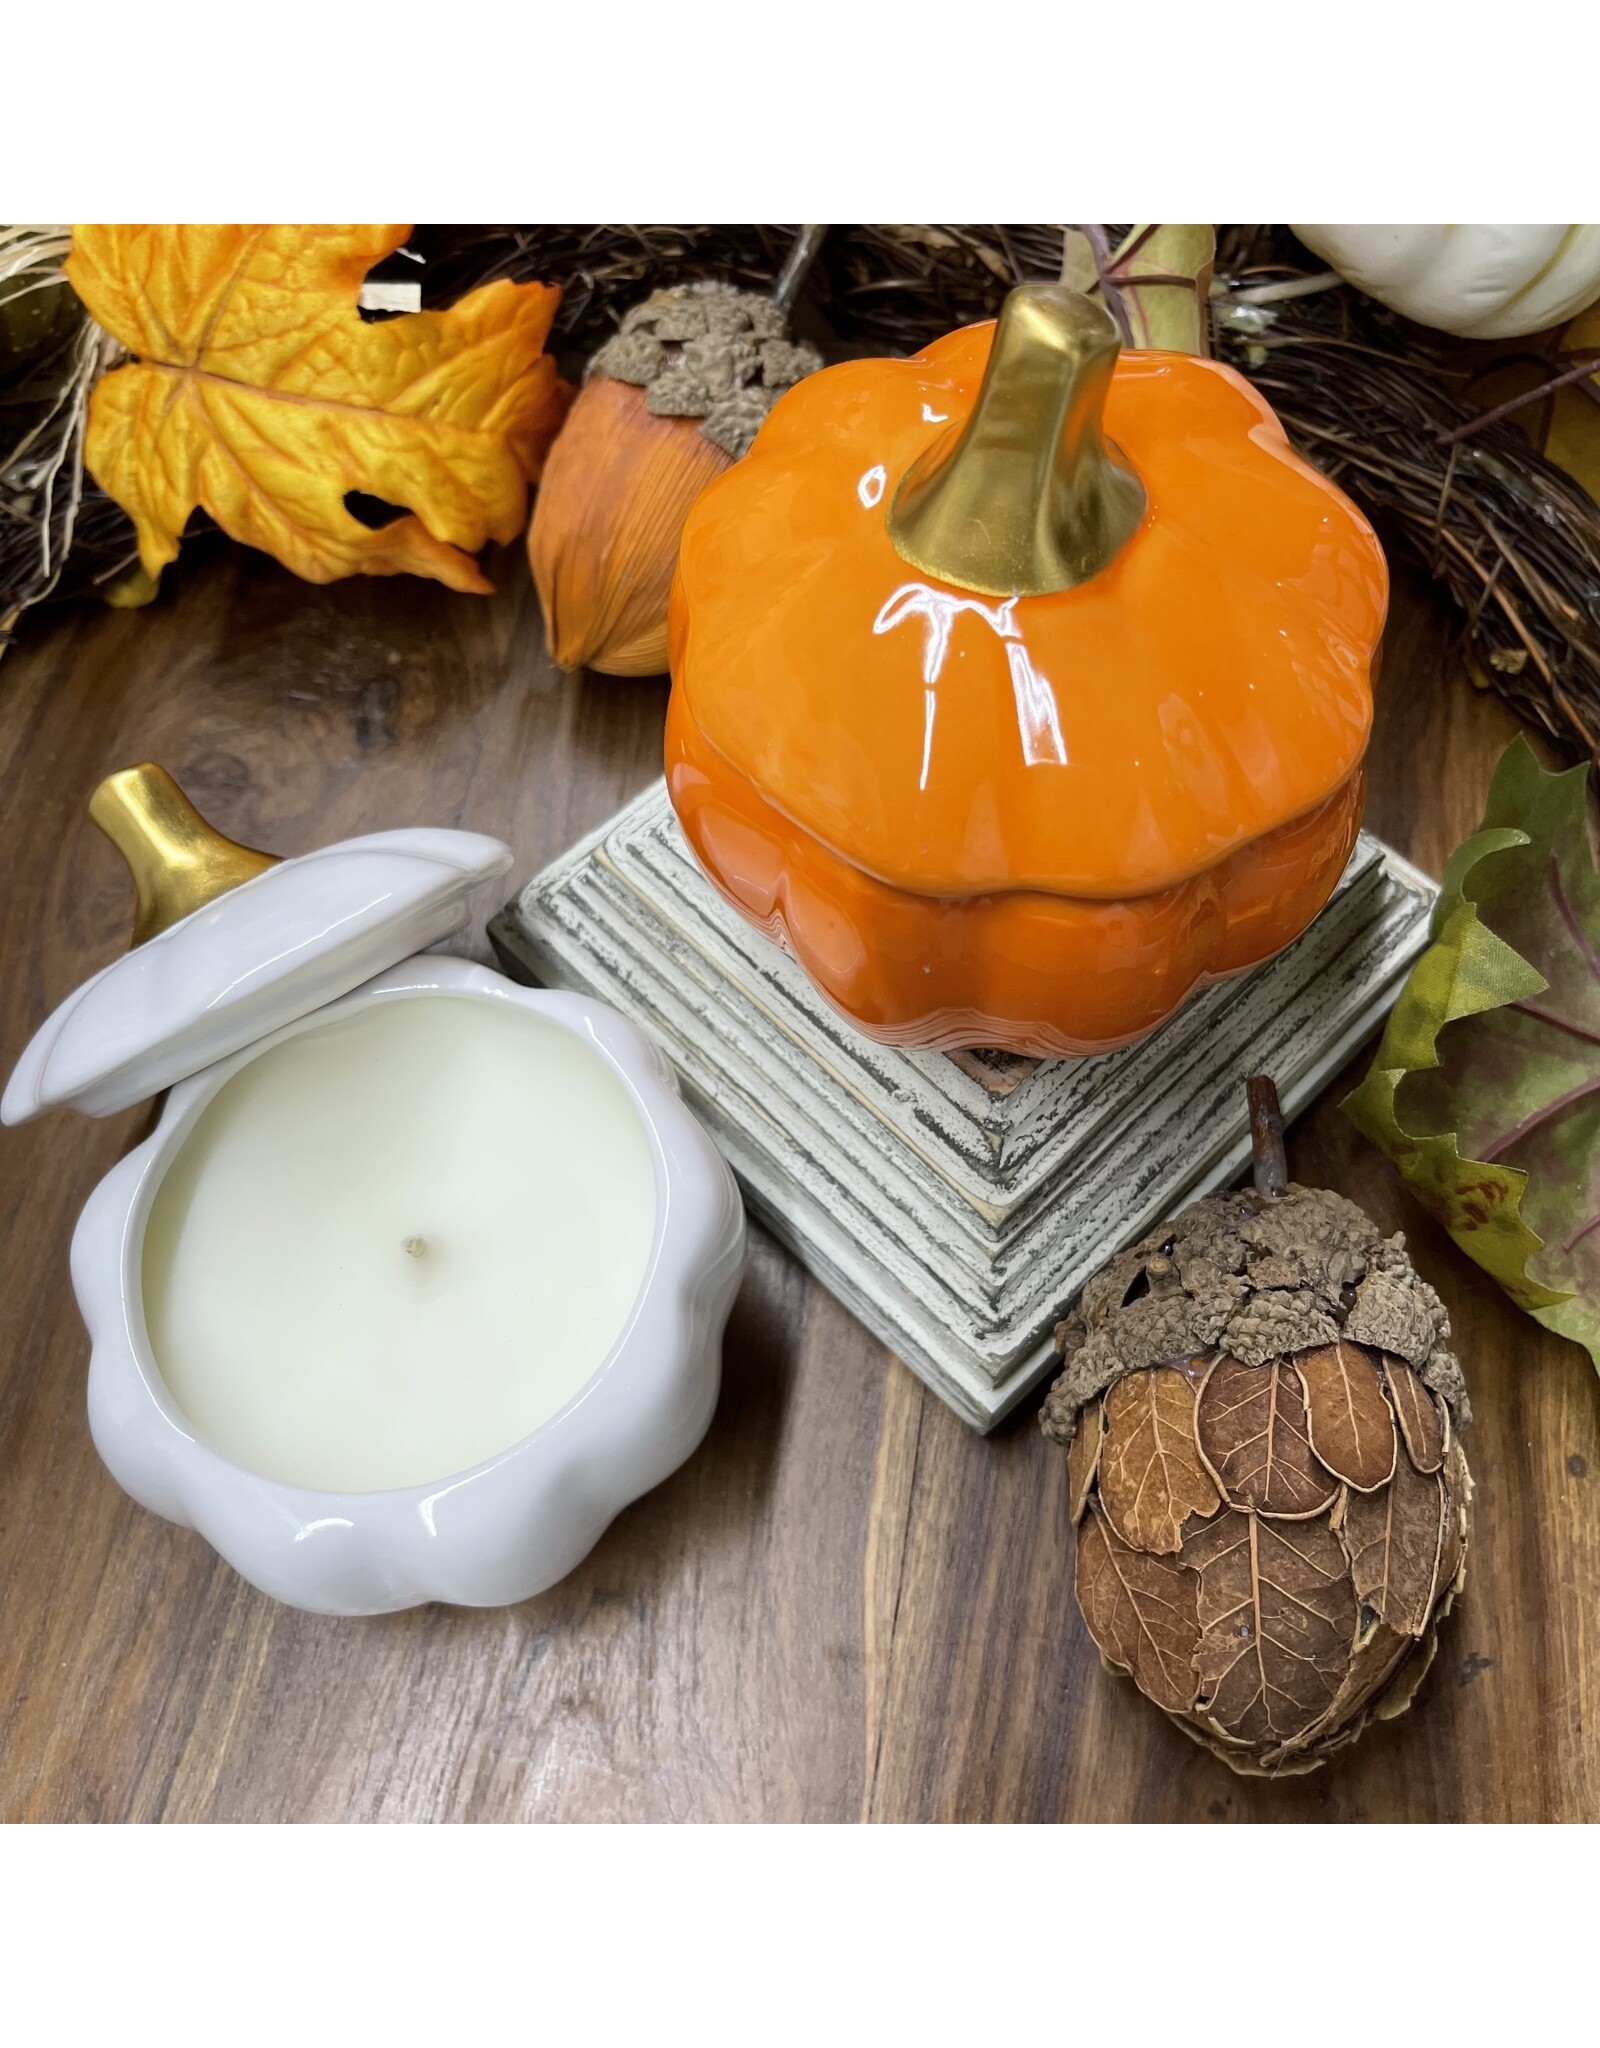 Southern Lights Candle Pumpkin Spice Scented Ceramic Pumpkin Candles